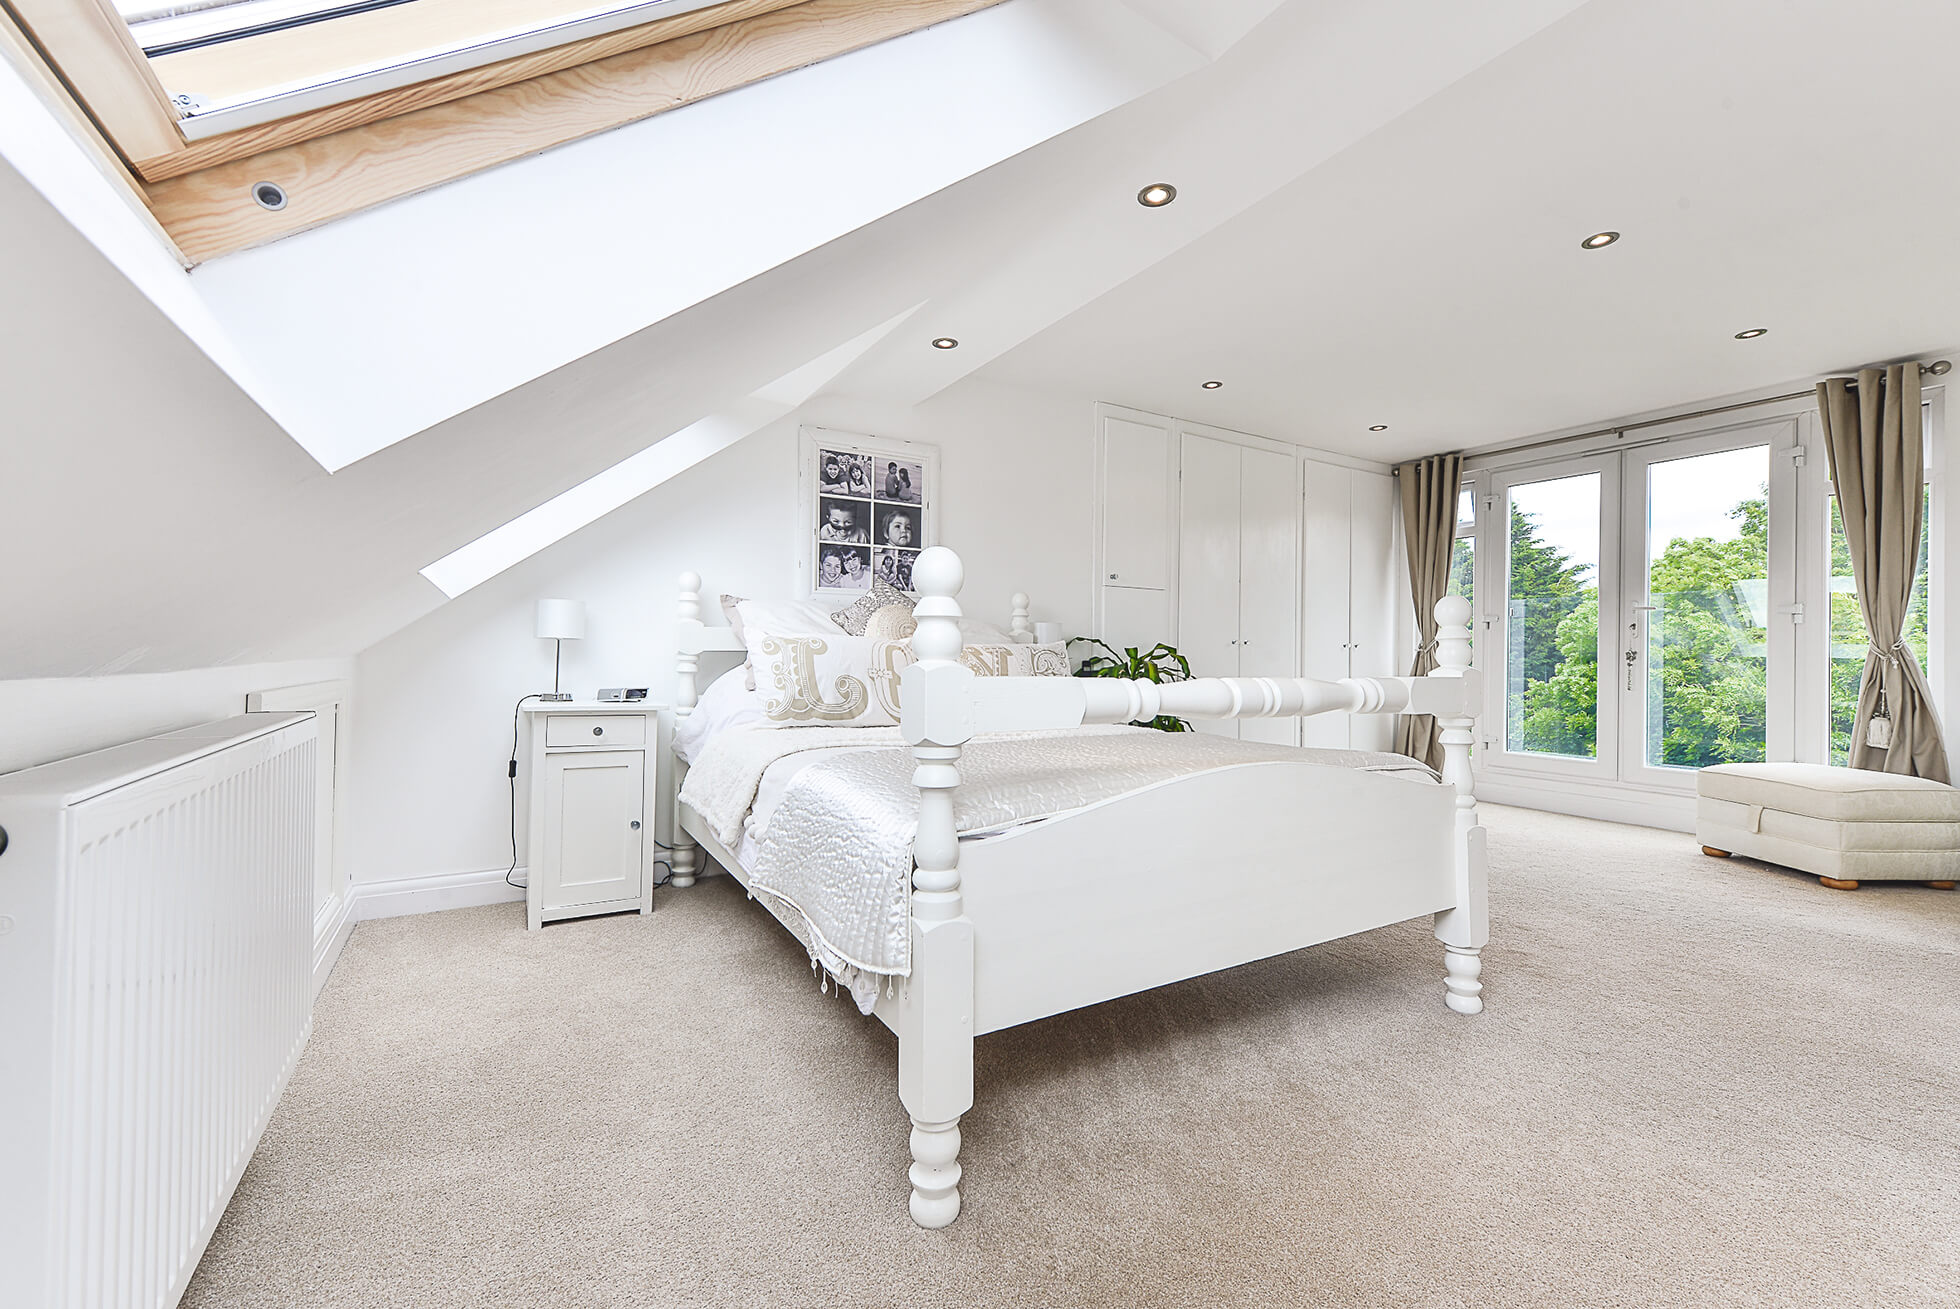 Do you have a question about converting your Loft in Ayot St Peter? Here are the most popular questions asked by our clients.